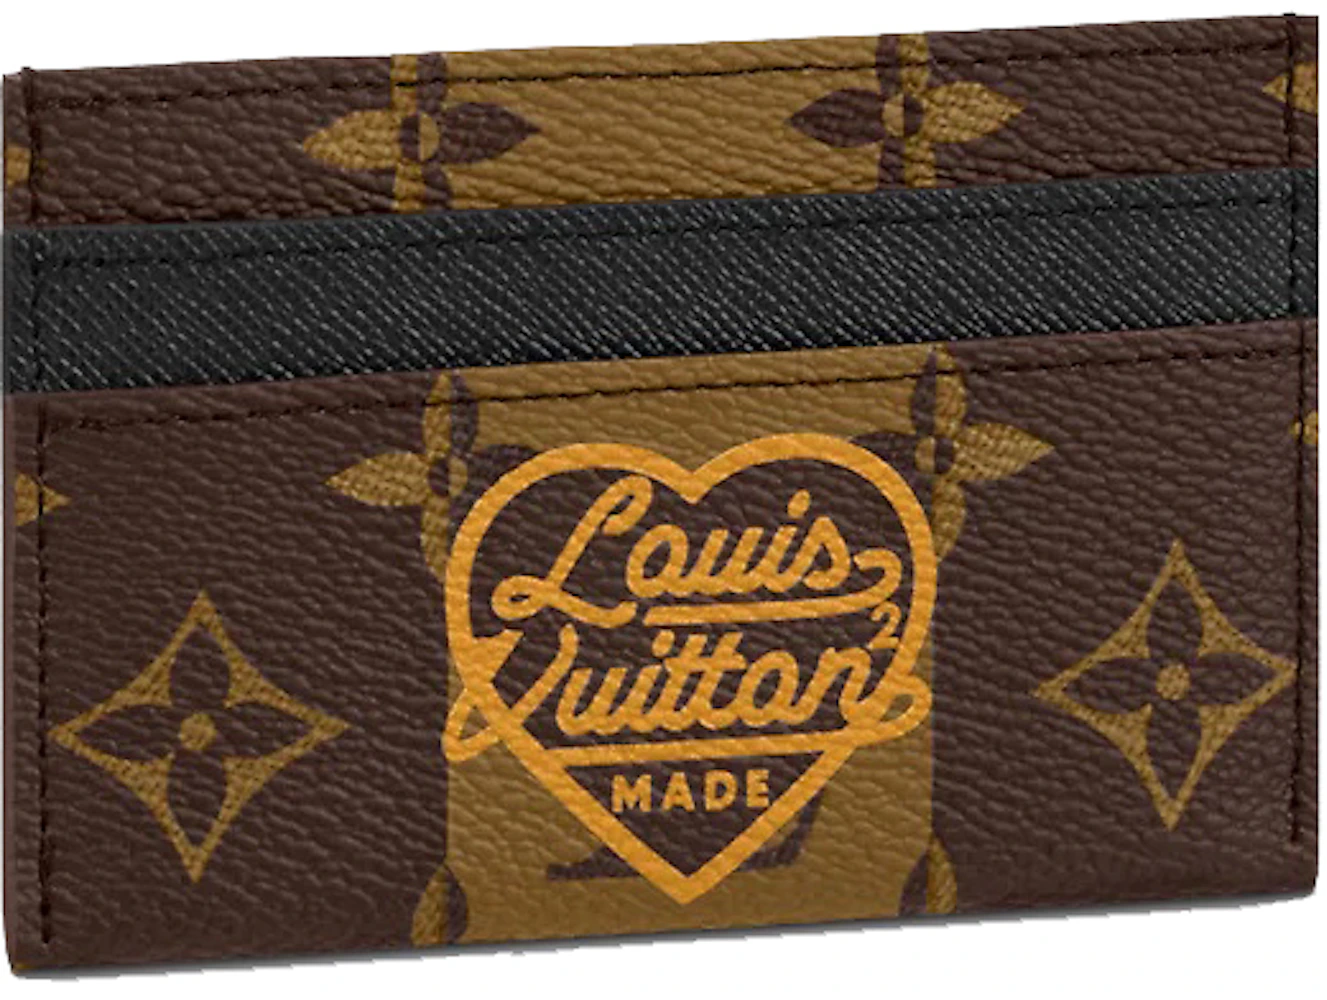 Louis Vuitton Nigo Double Phone Pouch Limited Edition Printed